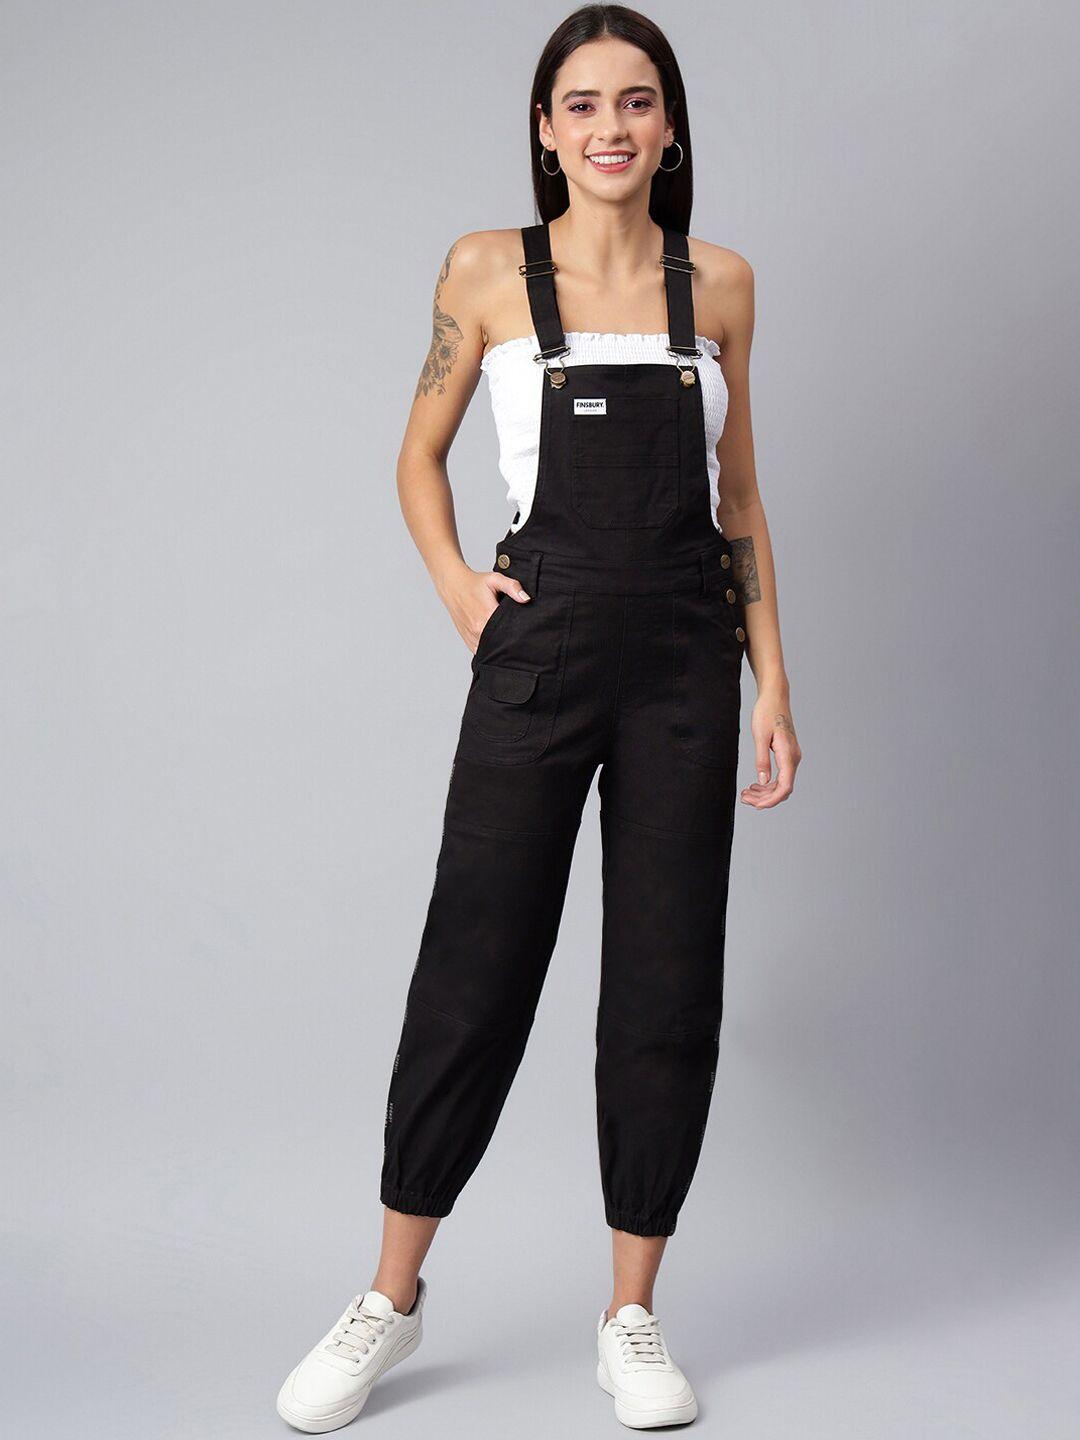 finsbury-london-women-black-solid-cotton-dungarees